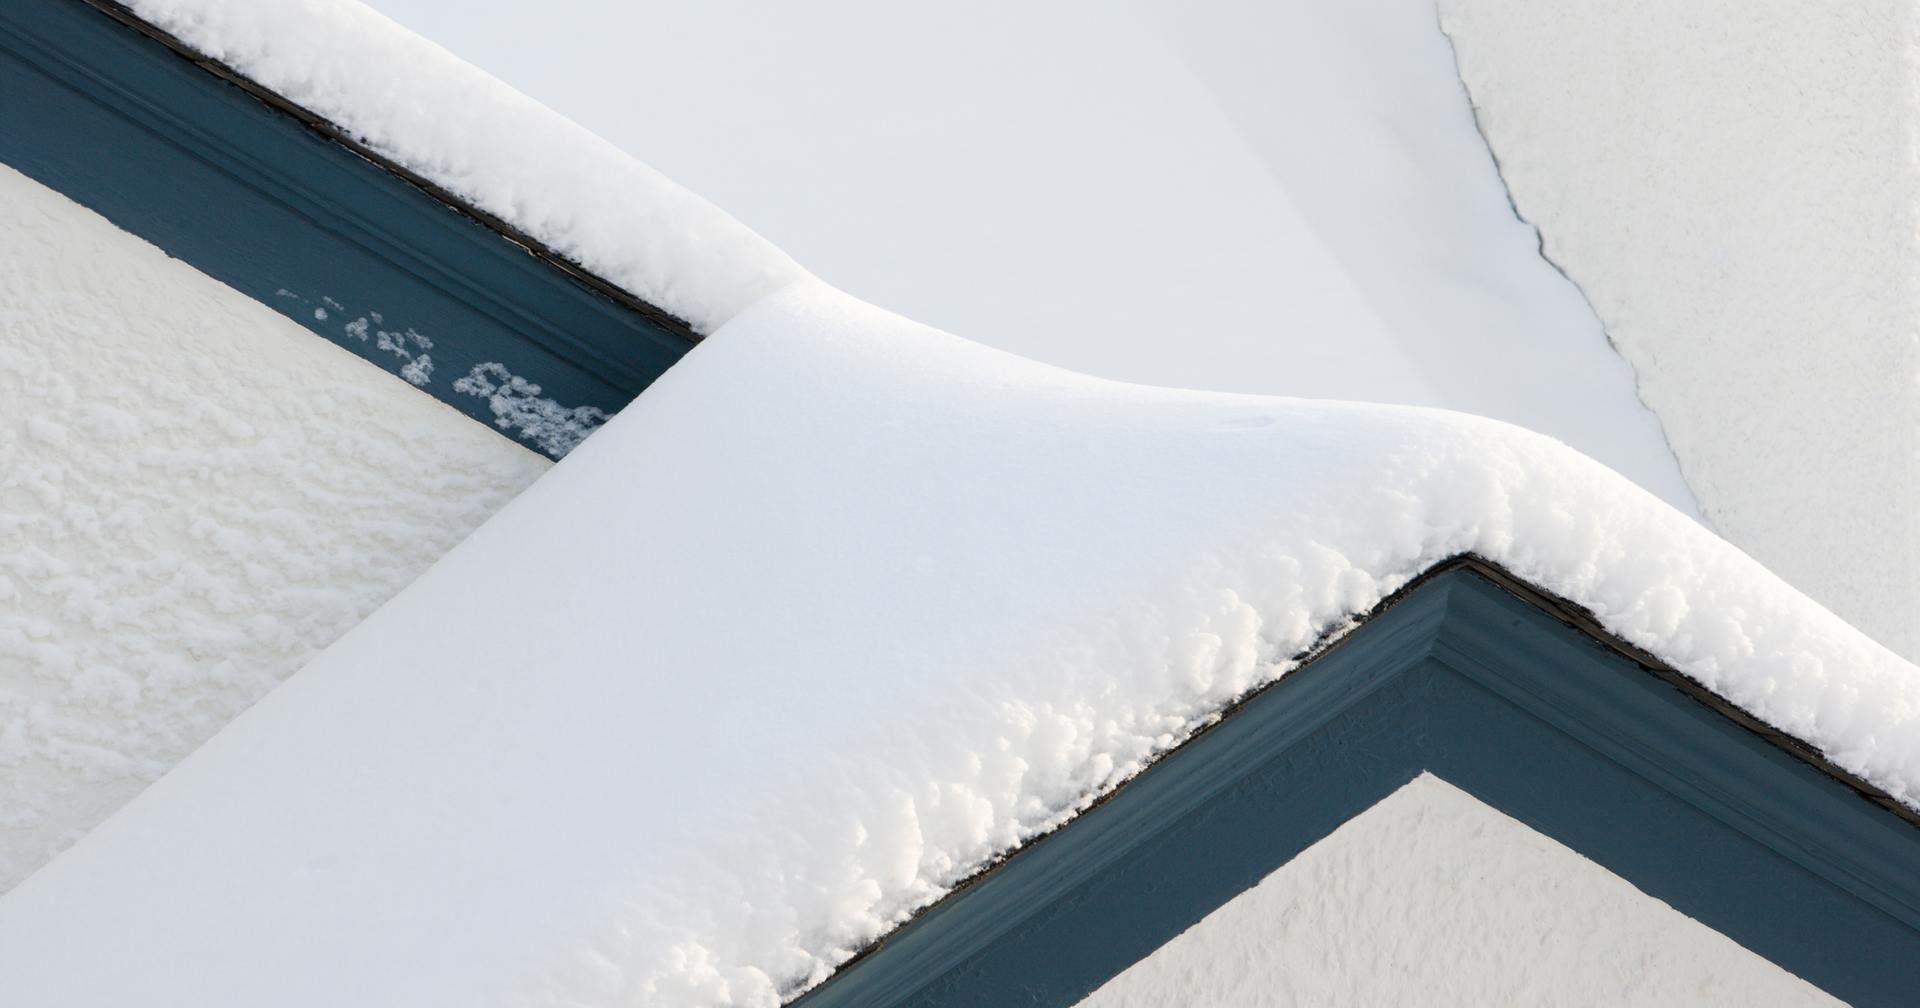 Aesthetic Appeal and Energy Efficiency: Roofing Materials for All Seasons